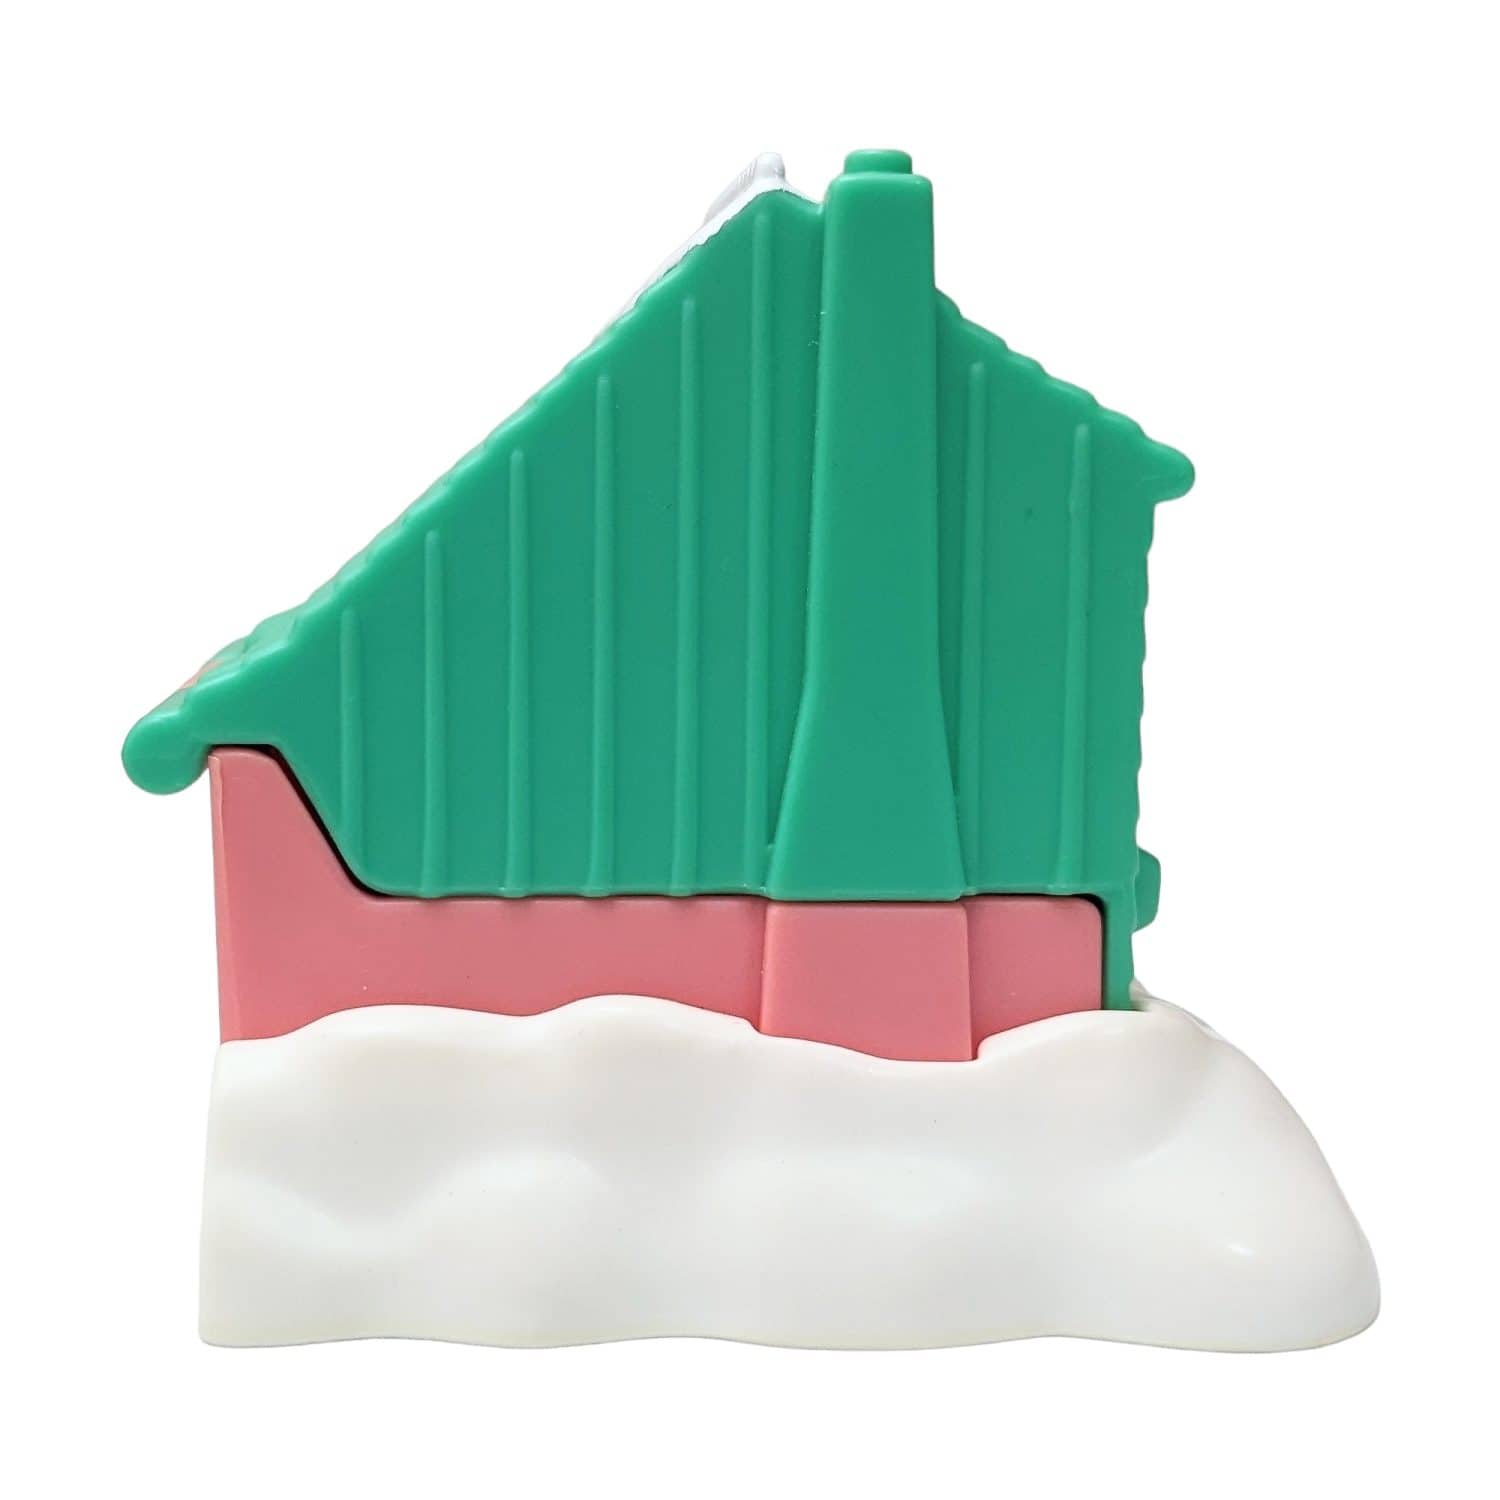 Vintage Toy House with Snow